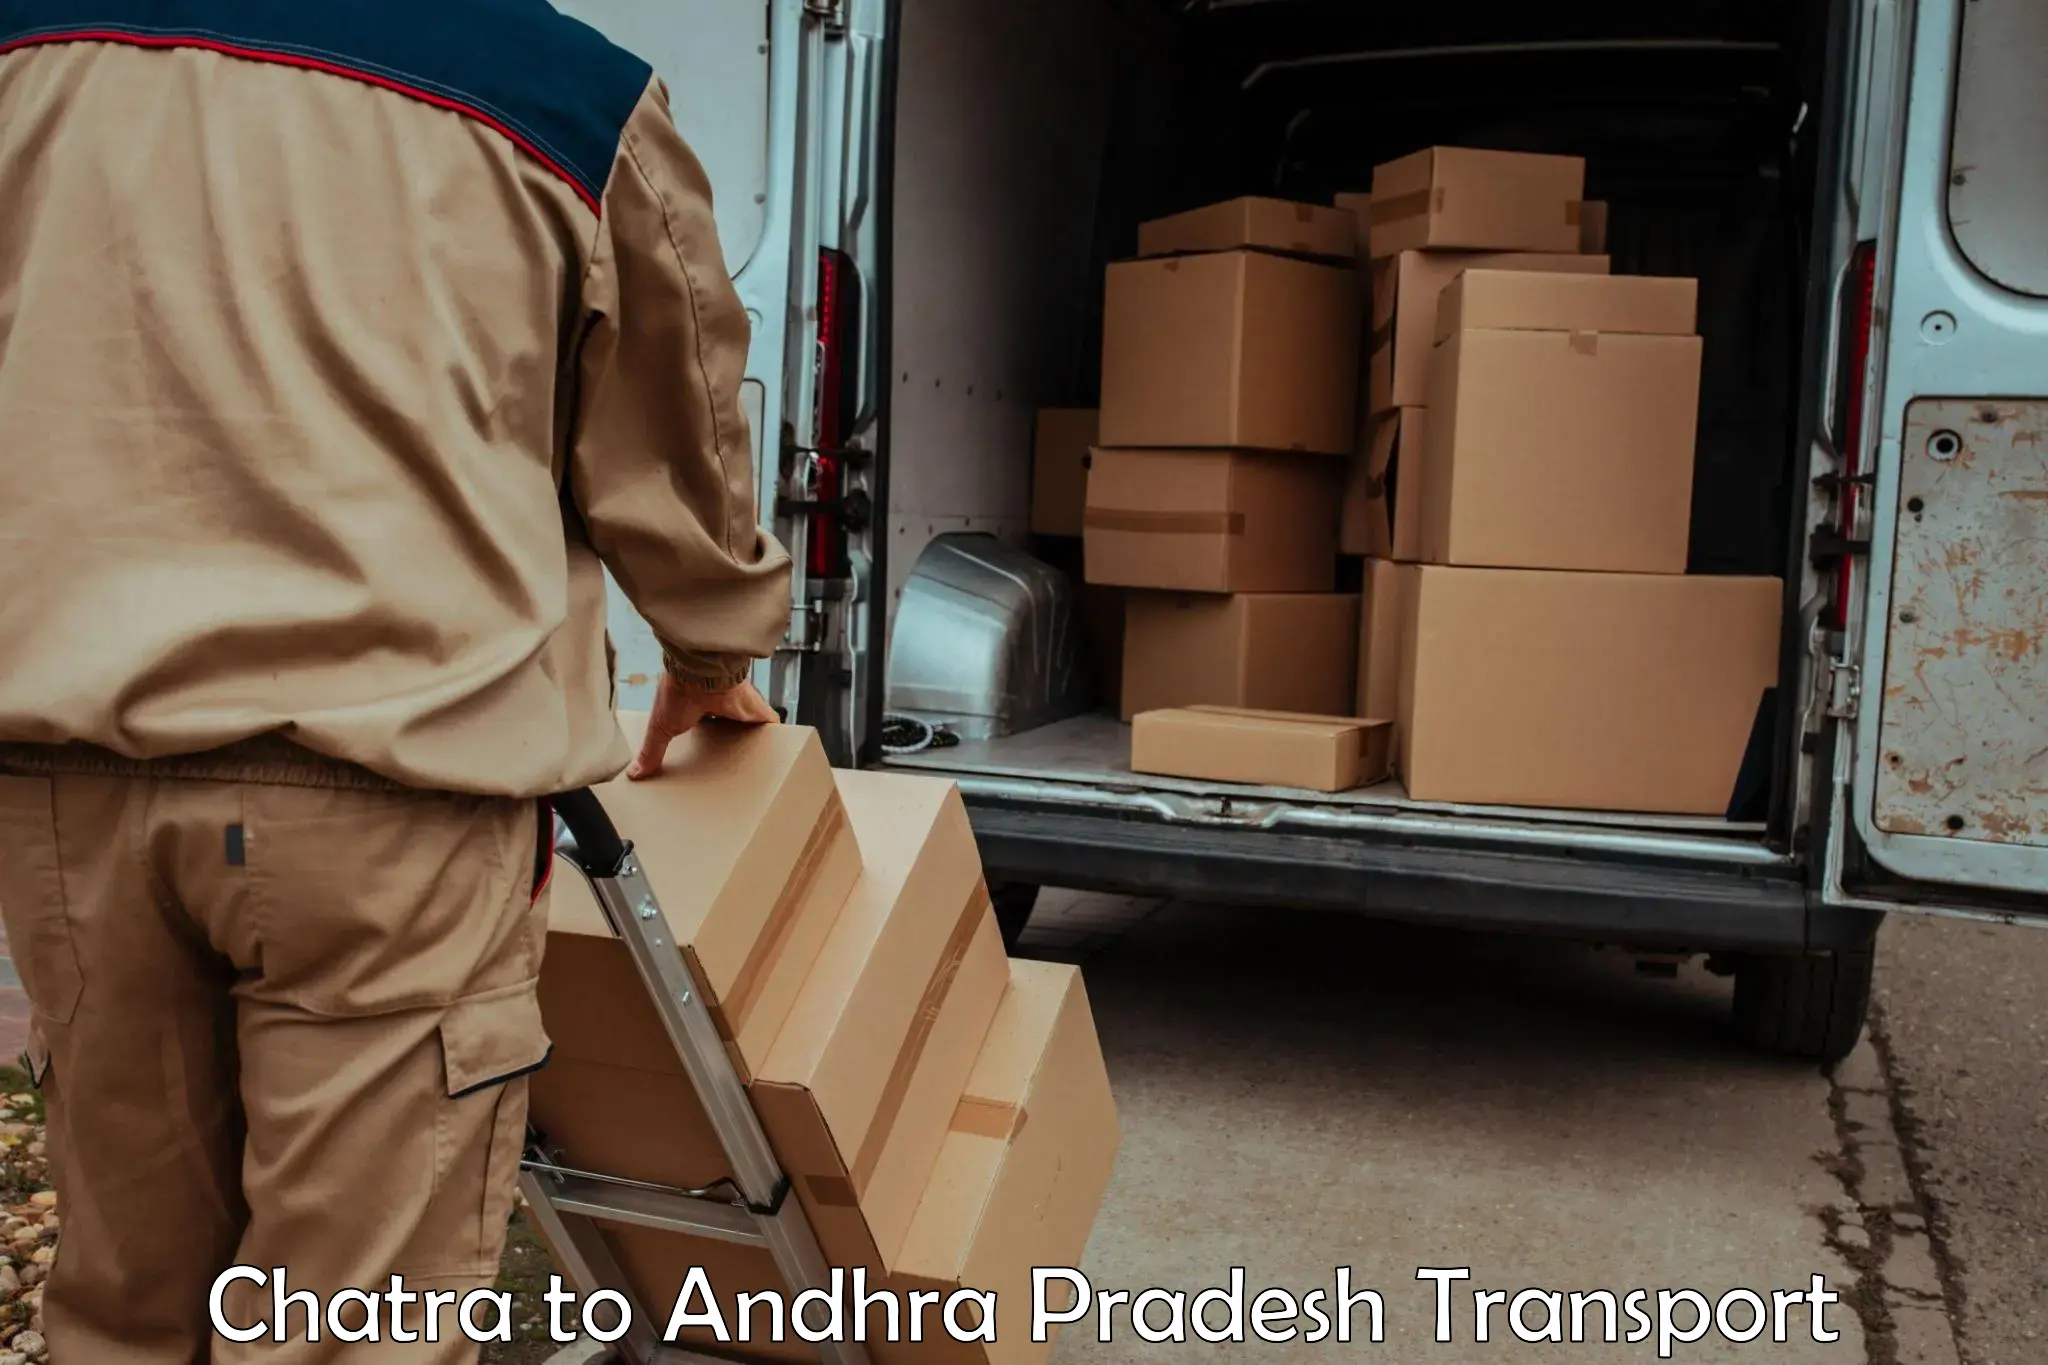 Furniture transport service in Chatra to Gullapalli